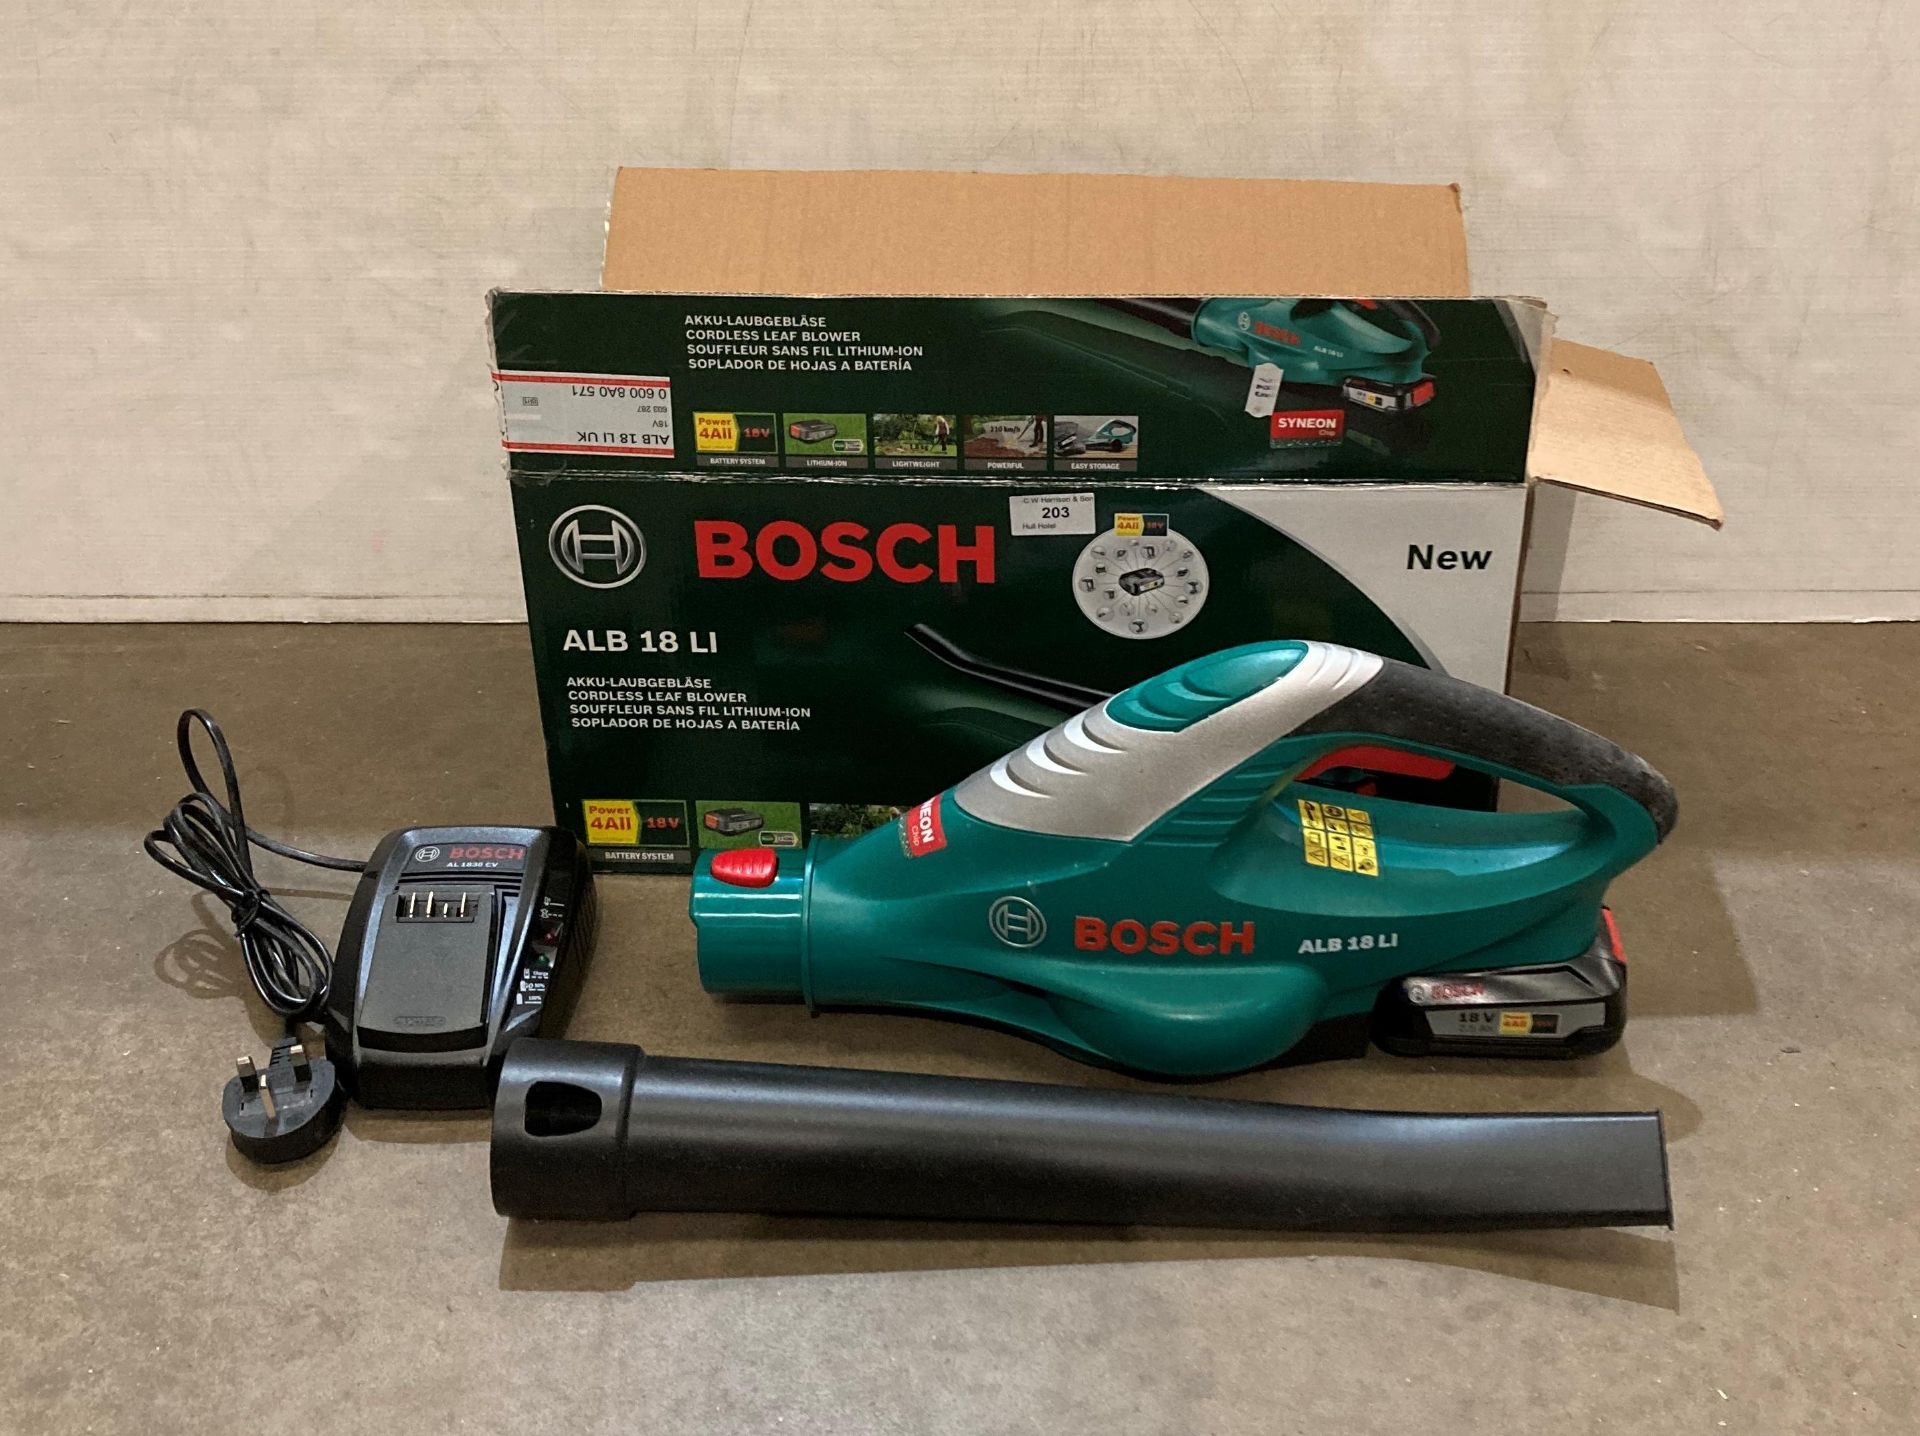 Bosch ALB 18 L1 18v cordless leaf-blower complete with battery,